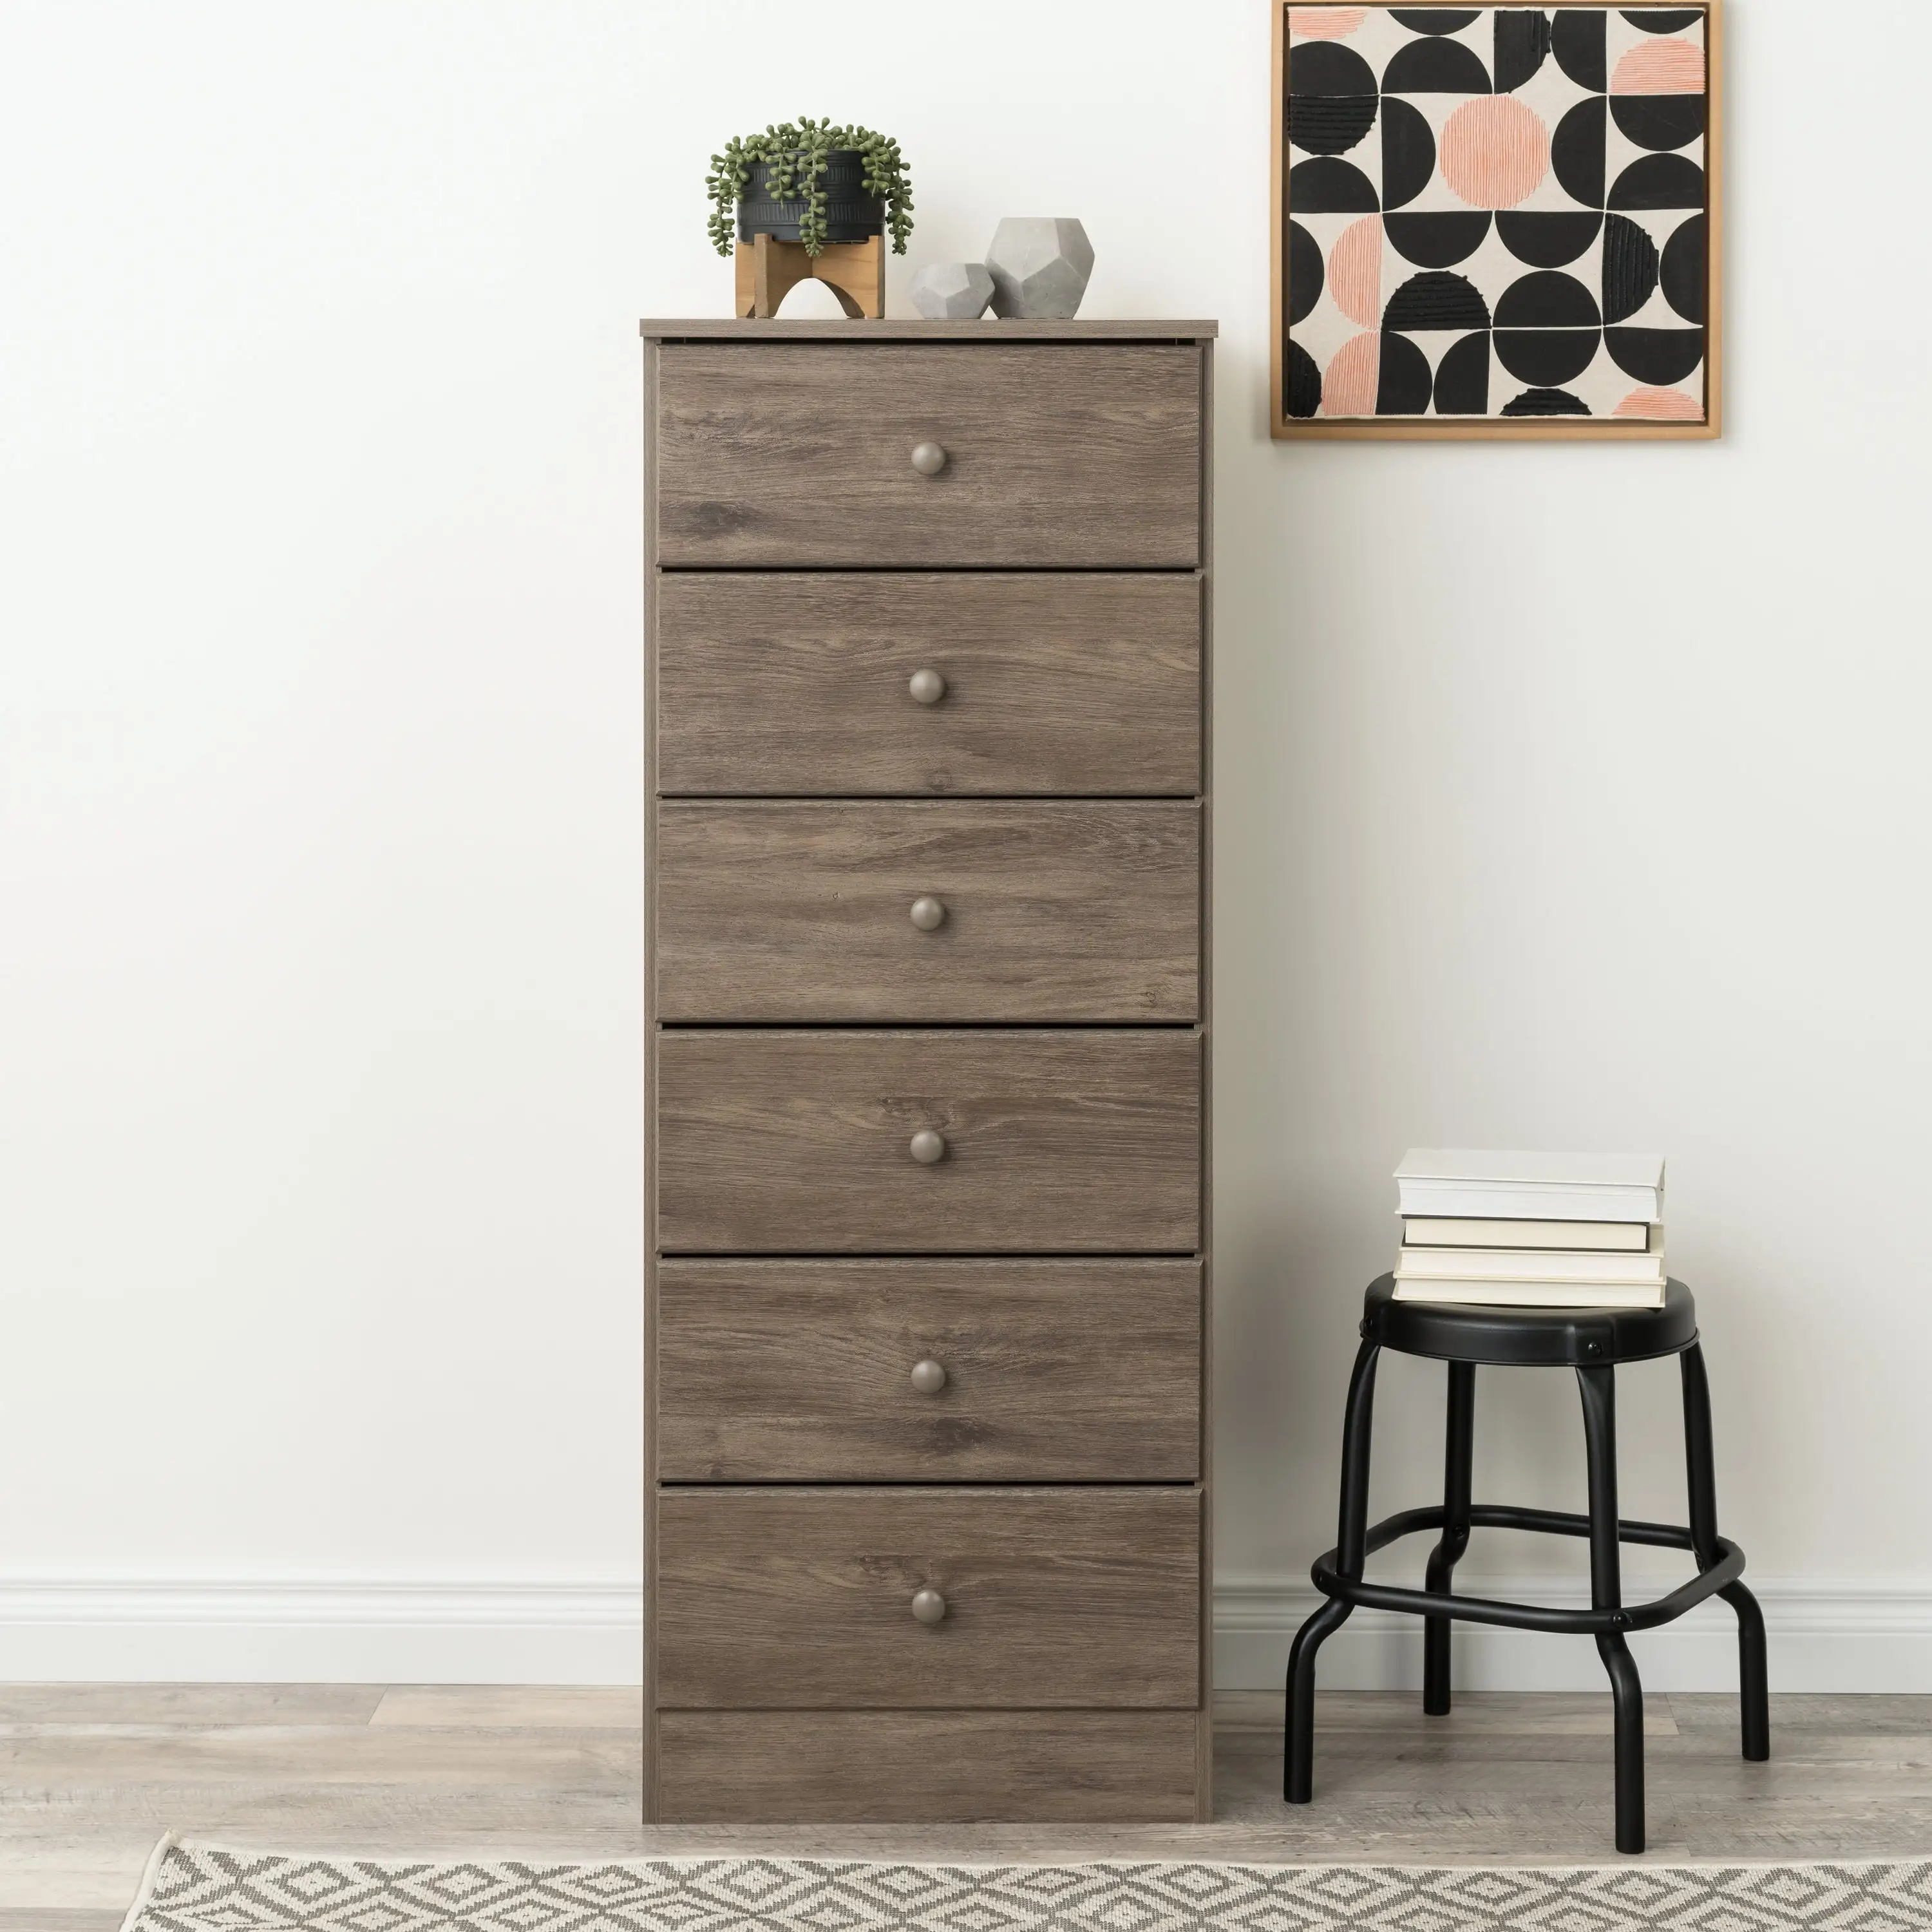 

Tall Gray Dresser: 16"D x 20"W x 52"H, Floor Storage Cabinet 6-Drawer Chest for Bedroom Perfect Drawers for Ample Storage